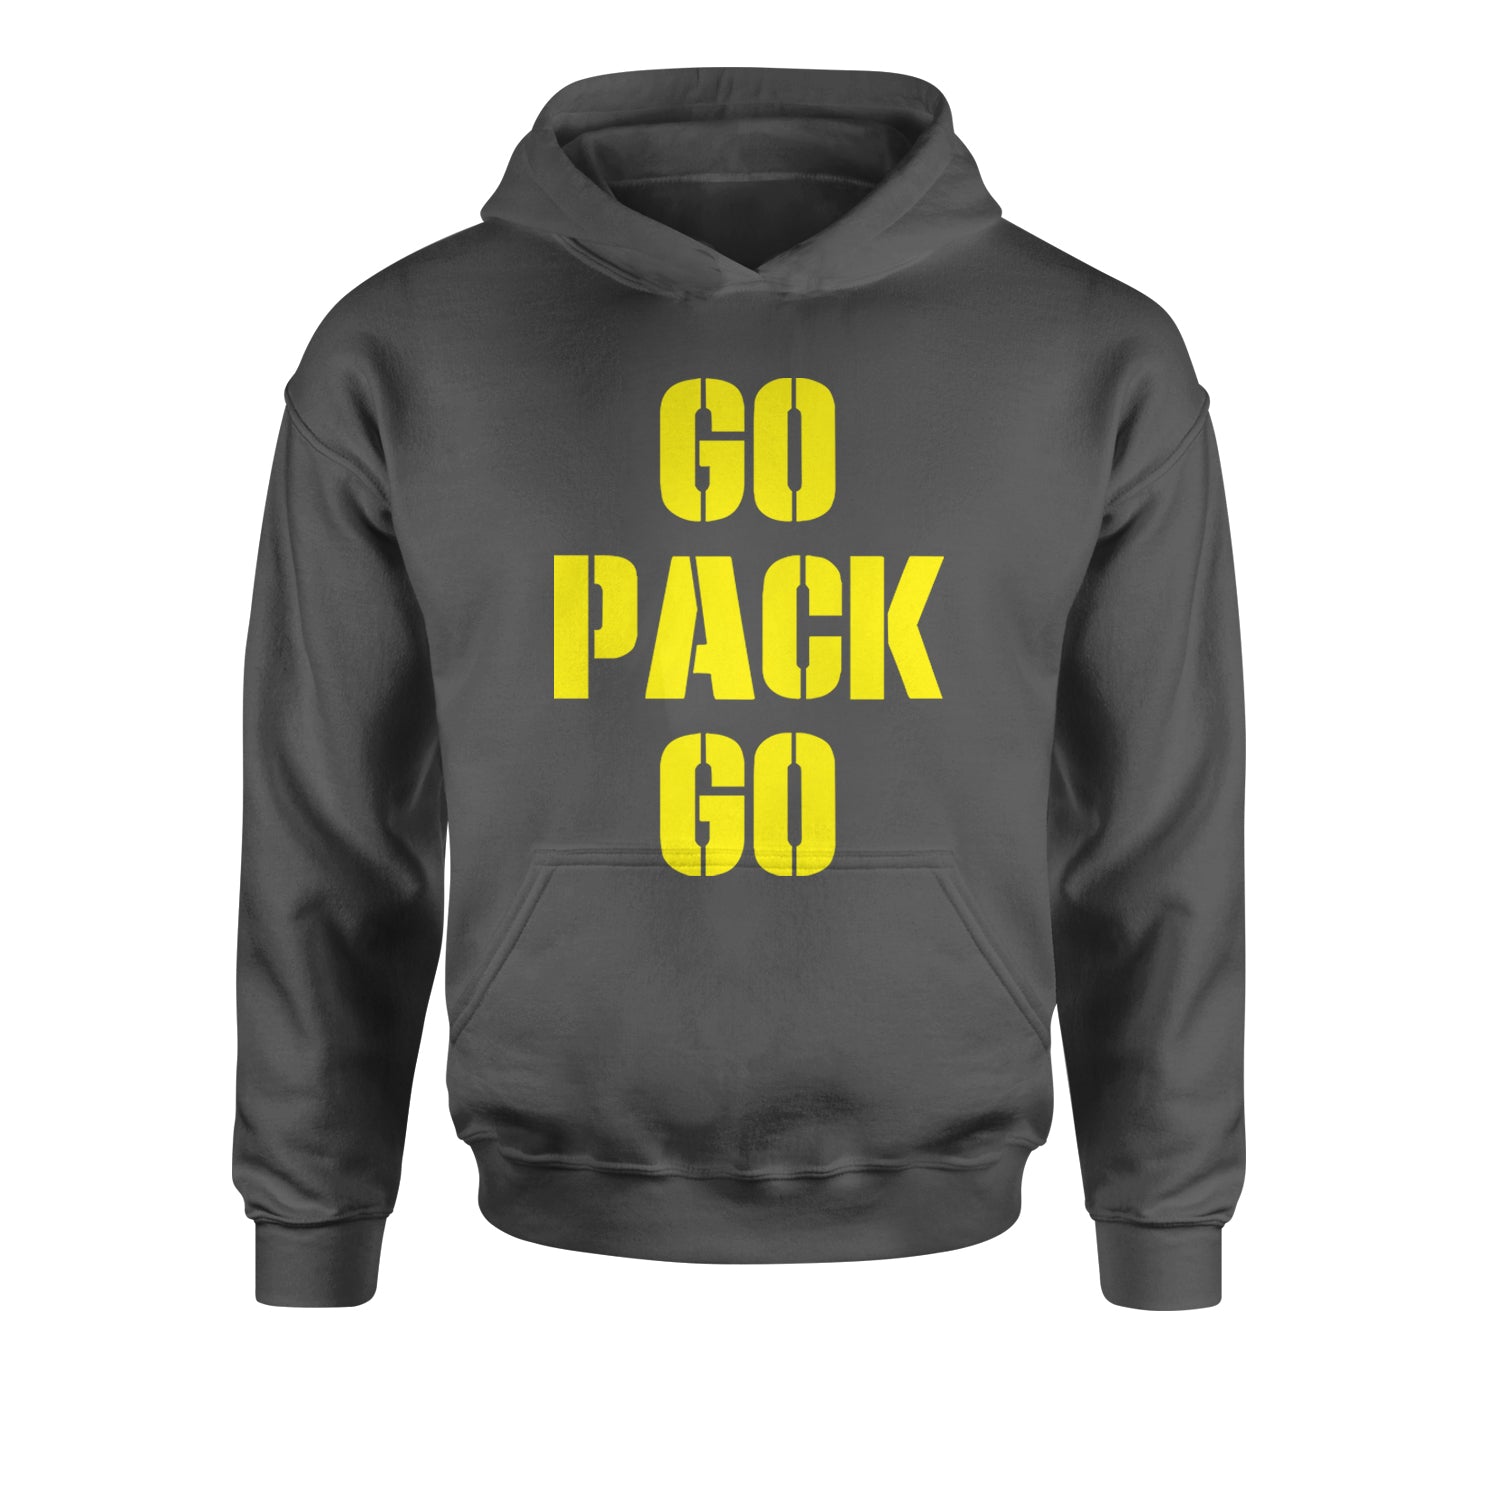 Go Pack Go Green Bay Youth-Sized Hoodie football, greenbay, packer by Expression Tees